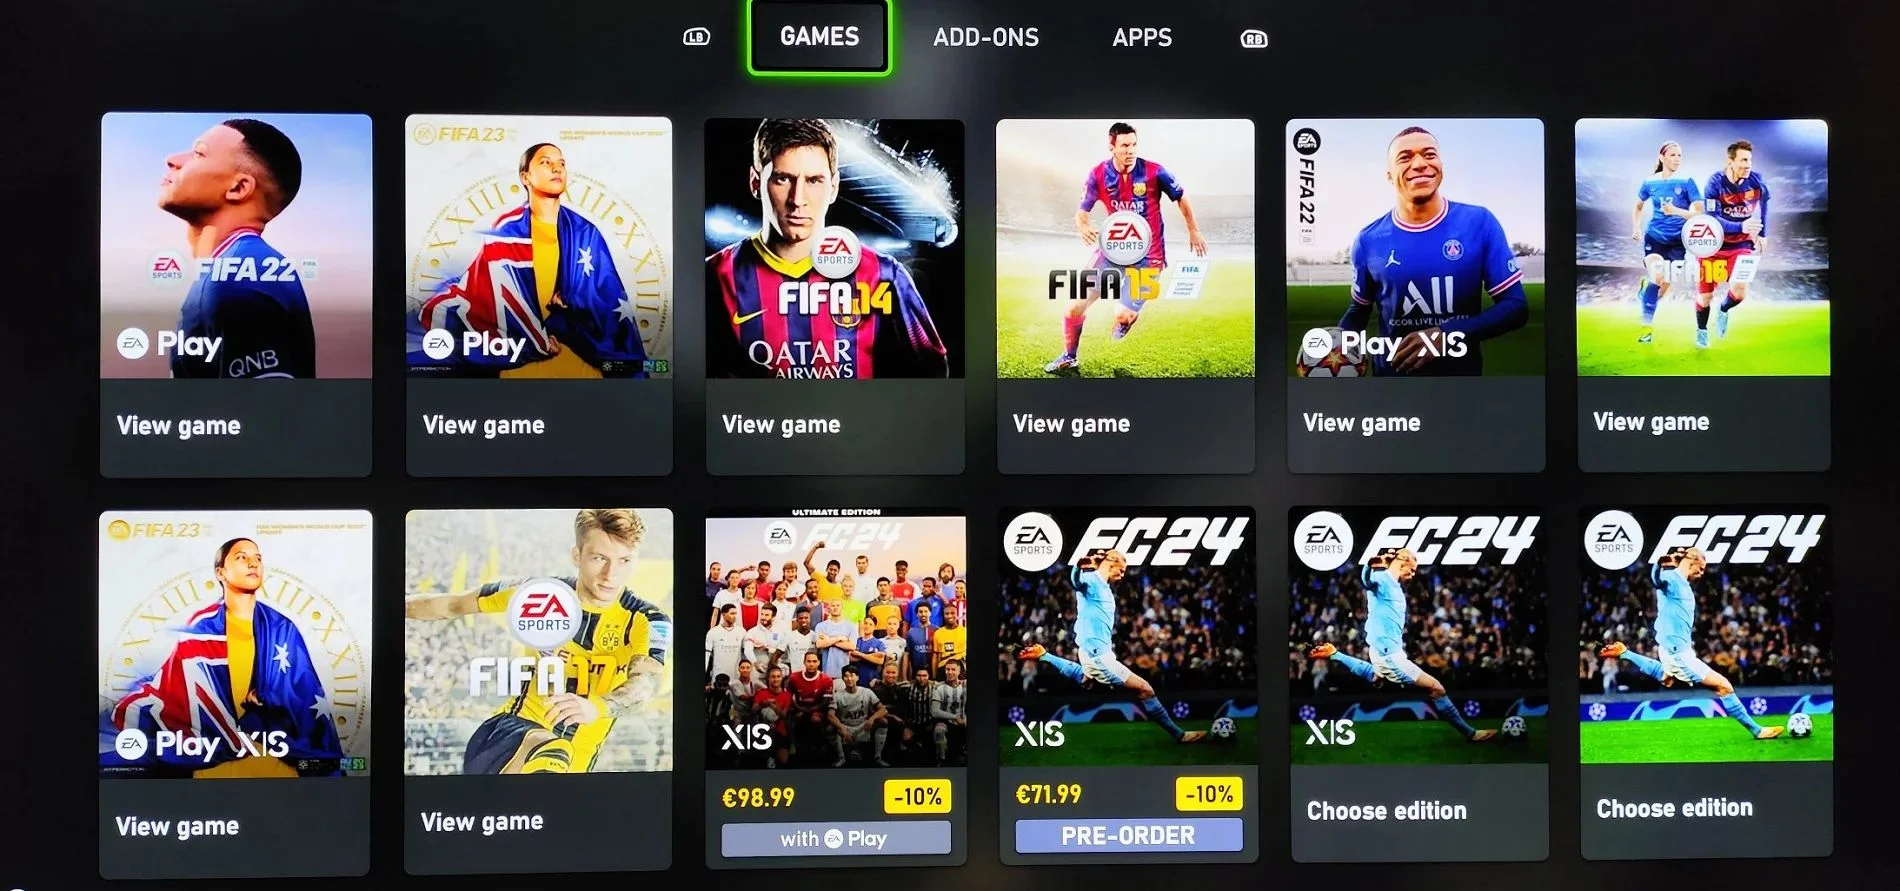 Electronic Arts has removed old parts of the FIFA series from marketplaces